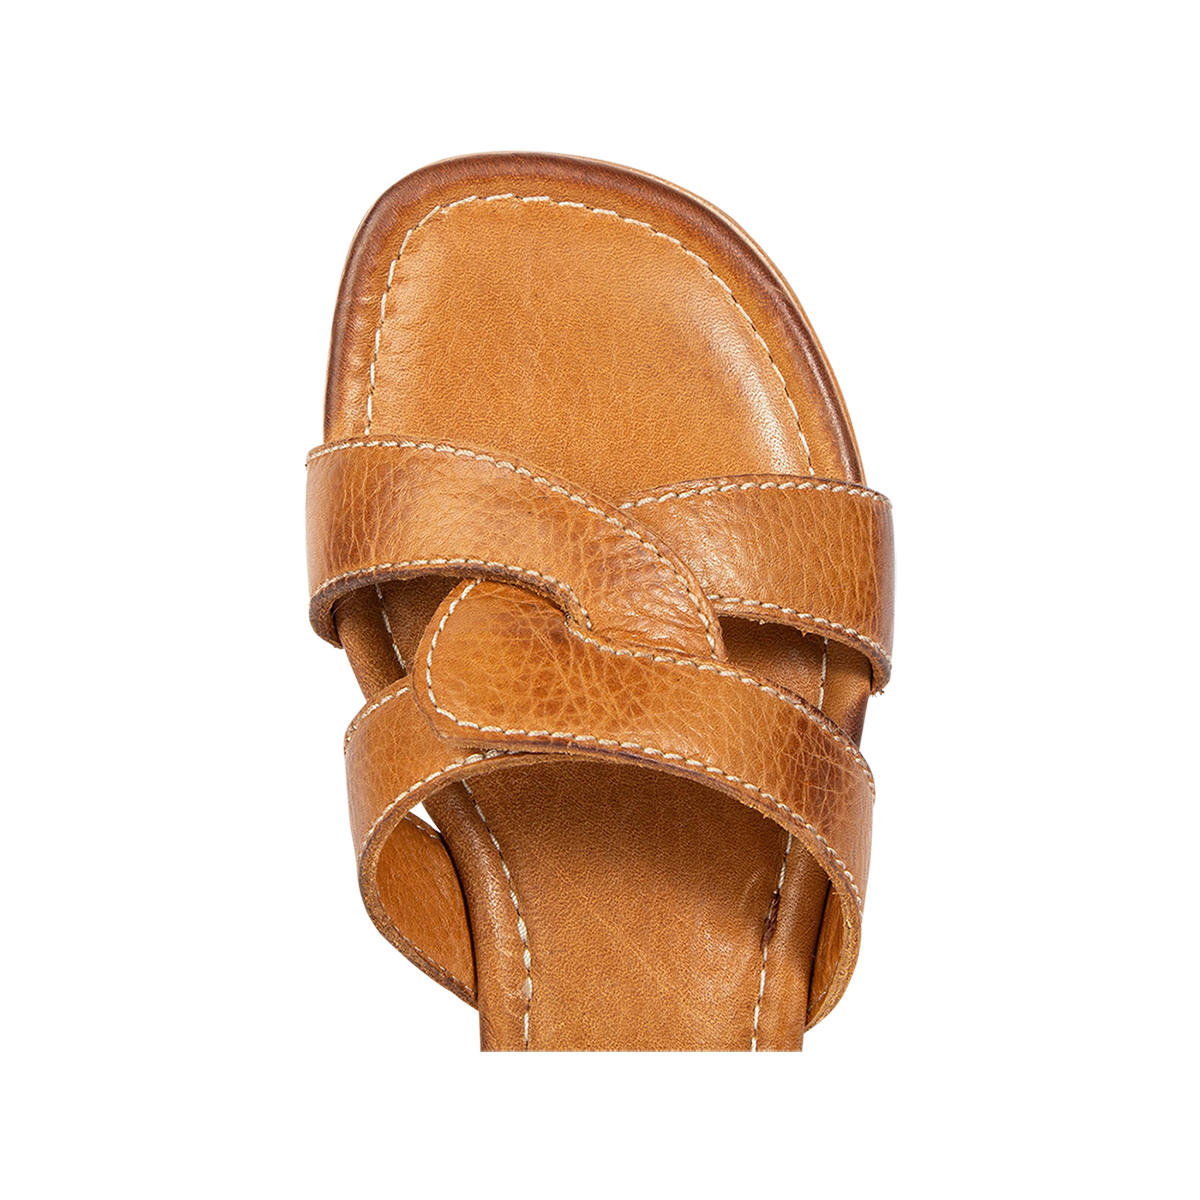 Top view showing criss-cross leather foot strap on FREEBIRD women's Sawyer wheat low heeled sandal